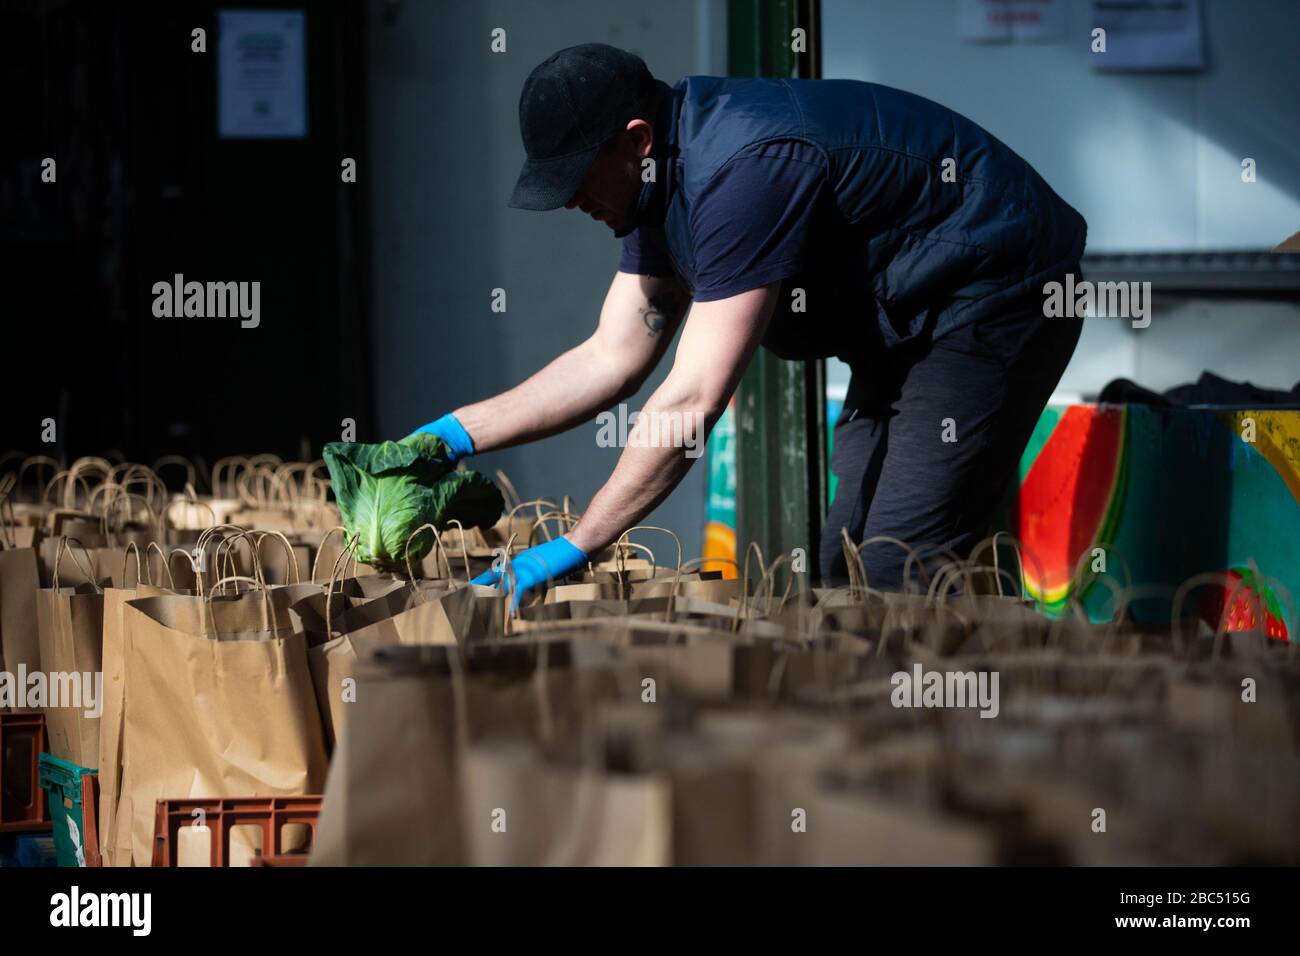 EDITORIAL USE ONLY Volunteers prepare some of the thousand fruit and vegetable packages destined for healthcare workers fighting the COVID-19 pandemic as Borough Market spearheads the national ‘Feed The Frontline’ campaign, London. Stock Photo